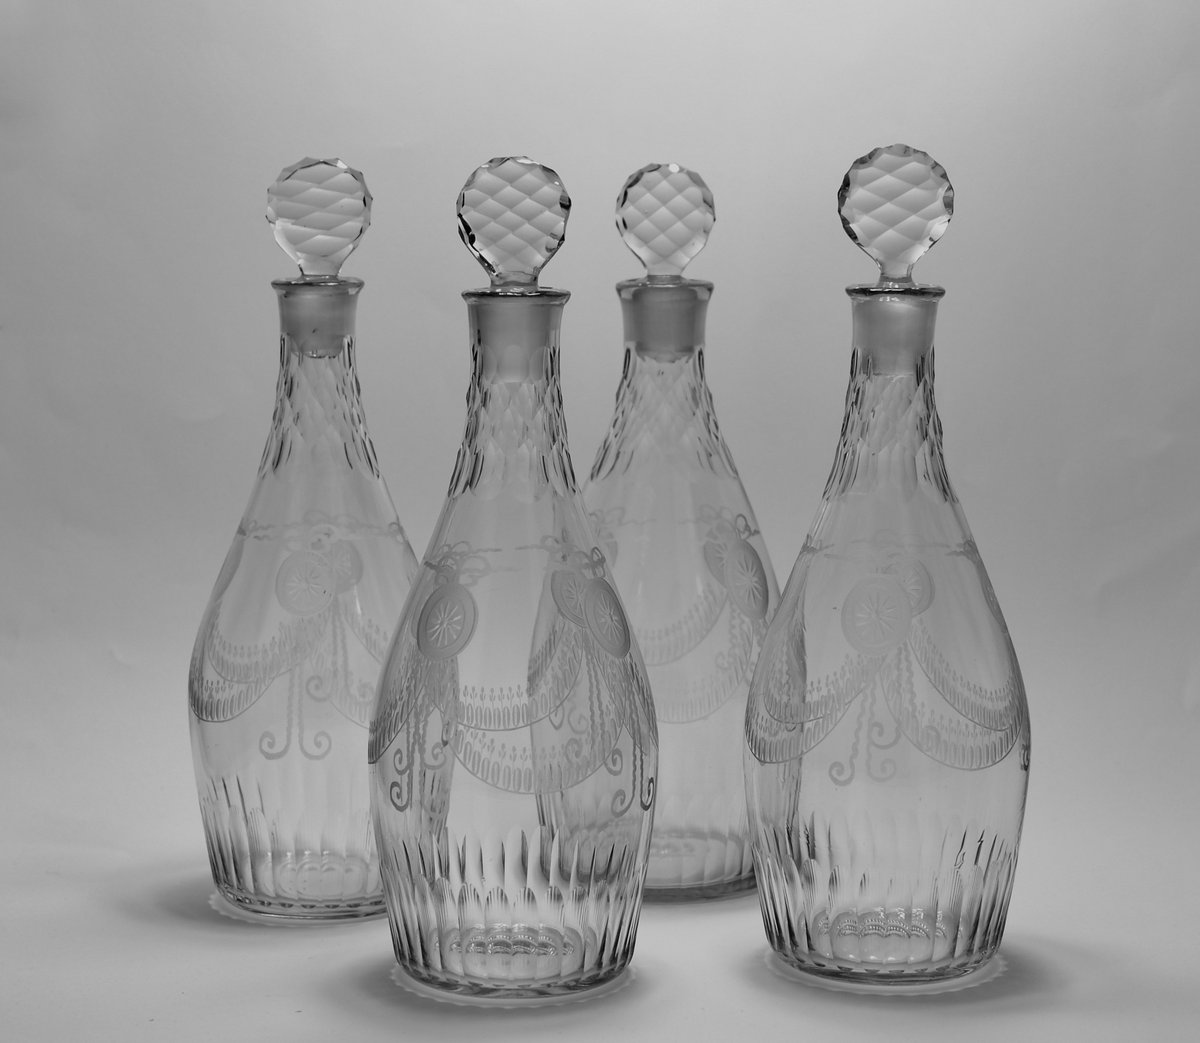 Rare set of four club shaped decanters engraved in the neoclassical manner with roundels, swags of stylised tulips, diamond facet cut necks and cut disc stoppers. English C1770. For sale Art & Antiques for Everyone Summer Fair. #antiquedecanters #18thcentury #marrisantiques